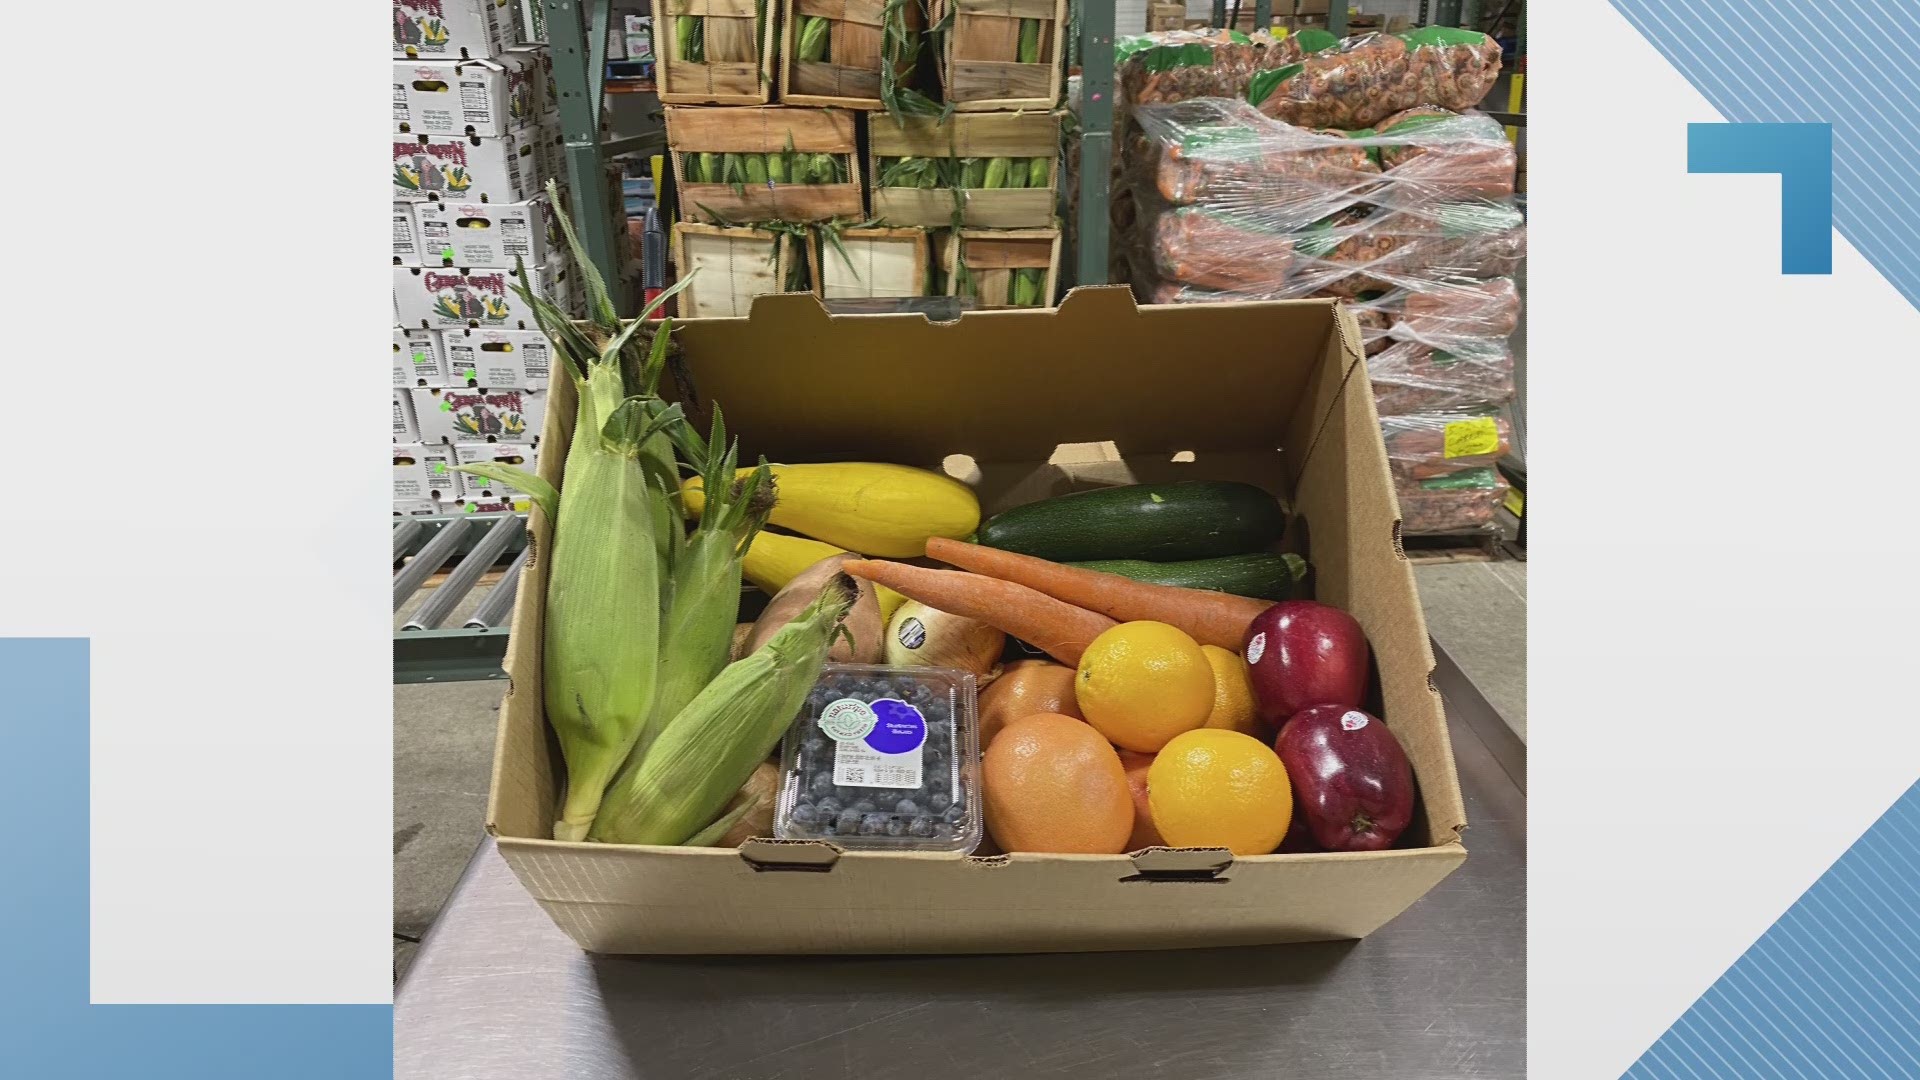 A USDA program is partnering with local distributors to purchase $3 million in produce, dairy, and meat, then deliver it to those in need.